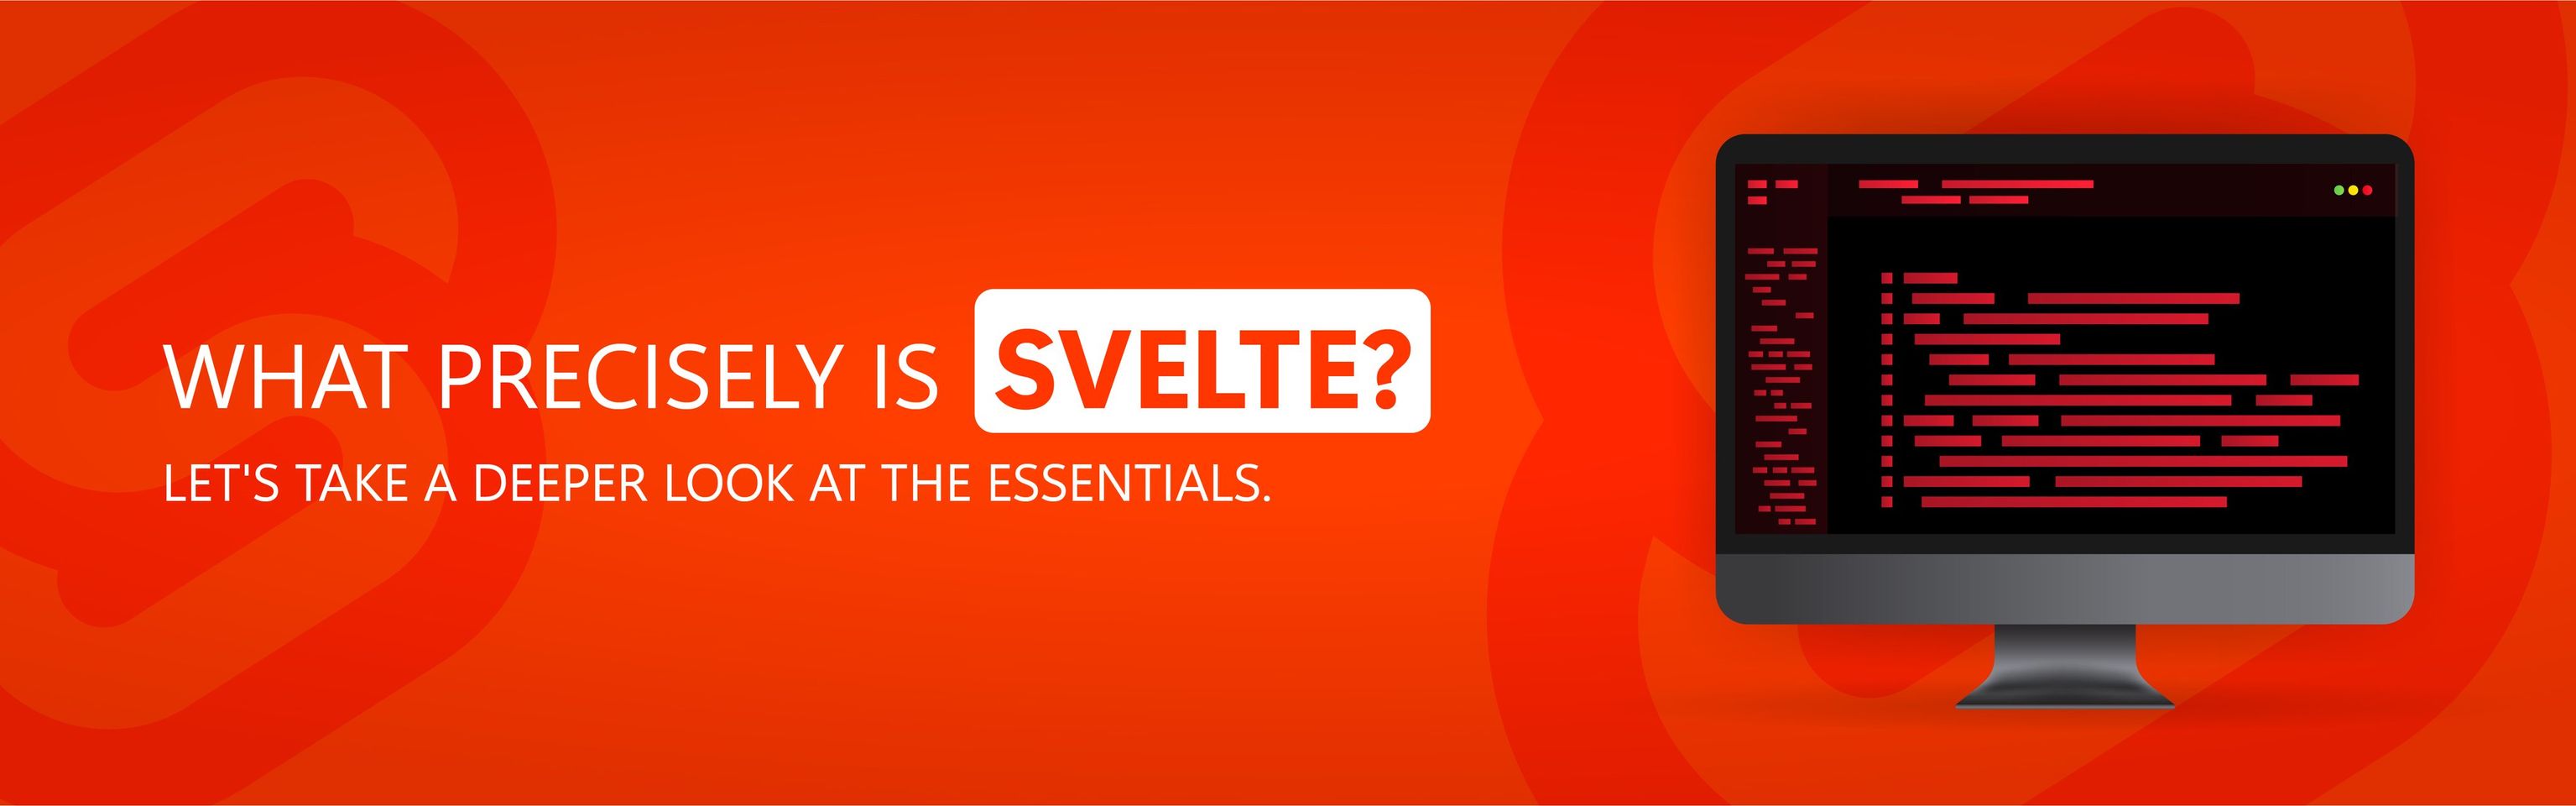 What precisely is Svelte? Let's take a deeper look at the essentials.